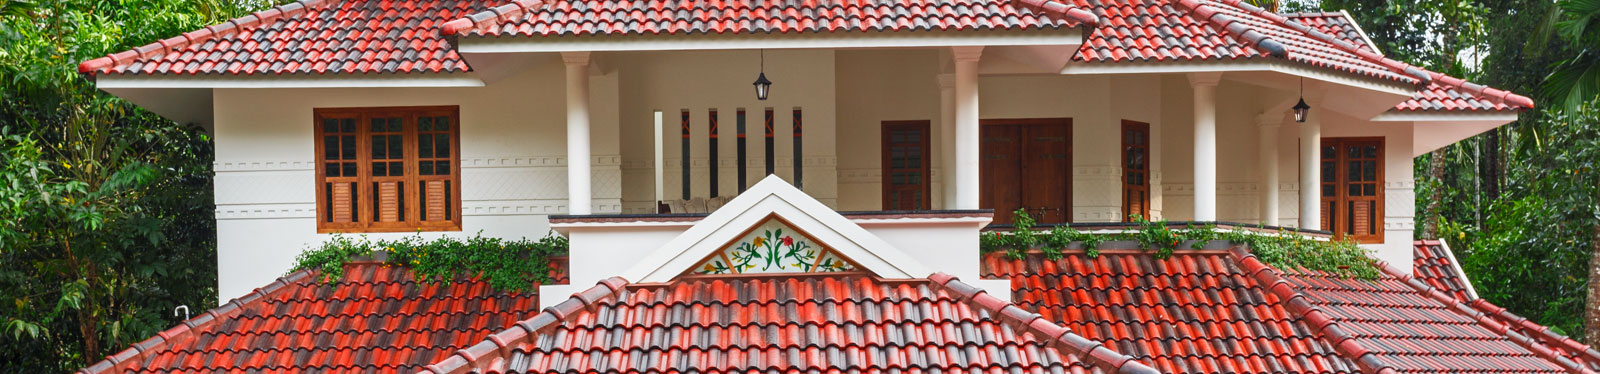 Pionnier Roofing Solutions Roof Tiles India